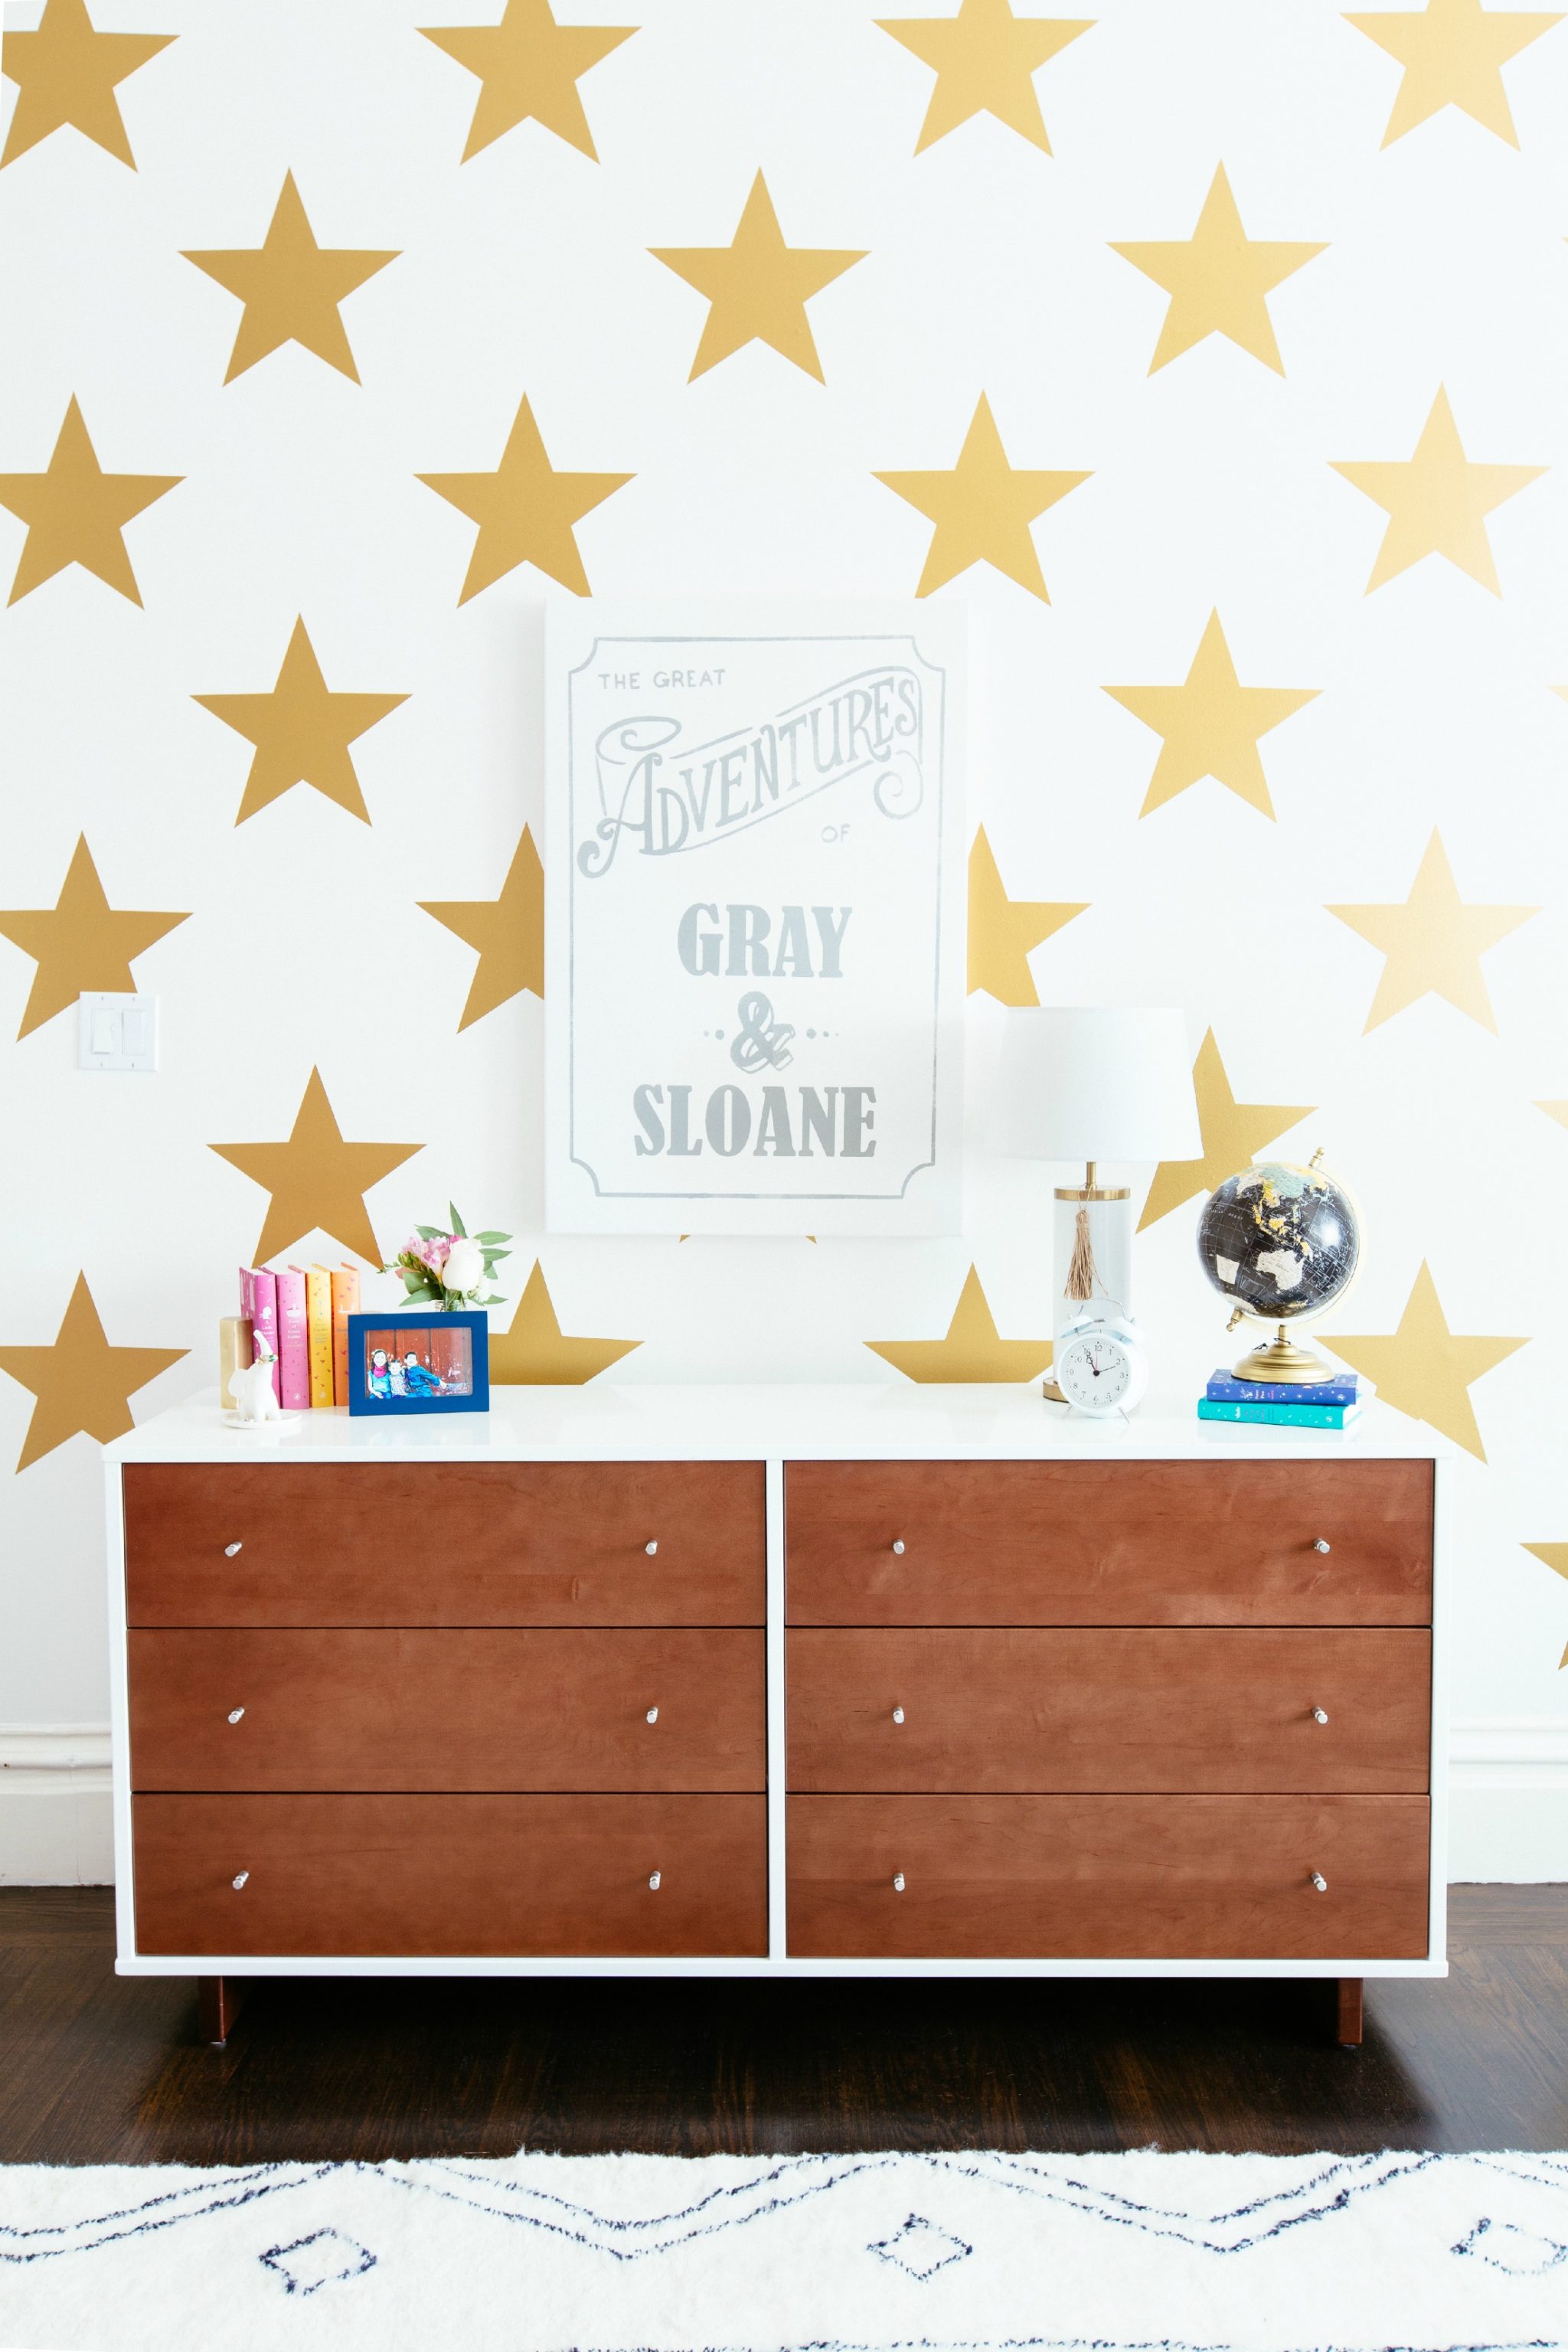 Big Kids' Room with Star Decals - Project Nursery